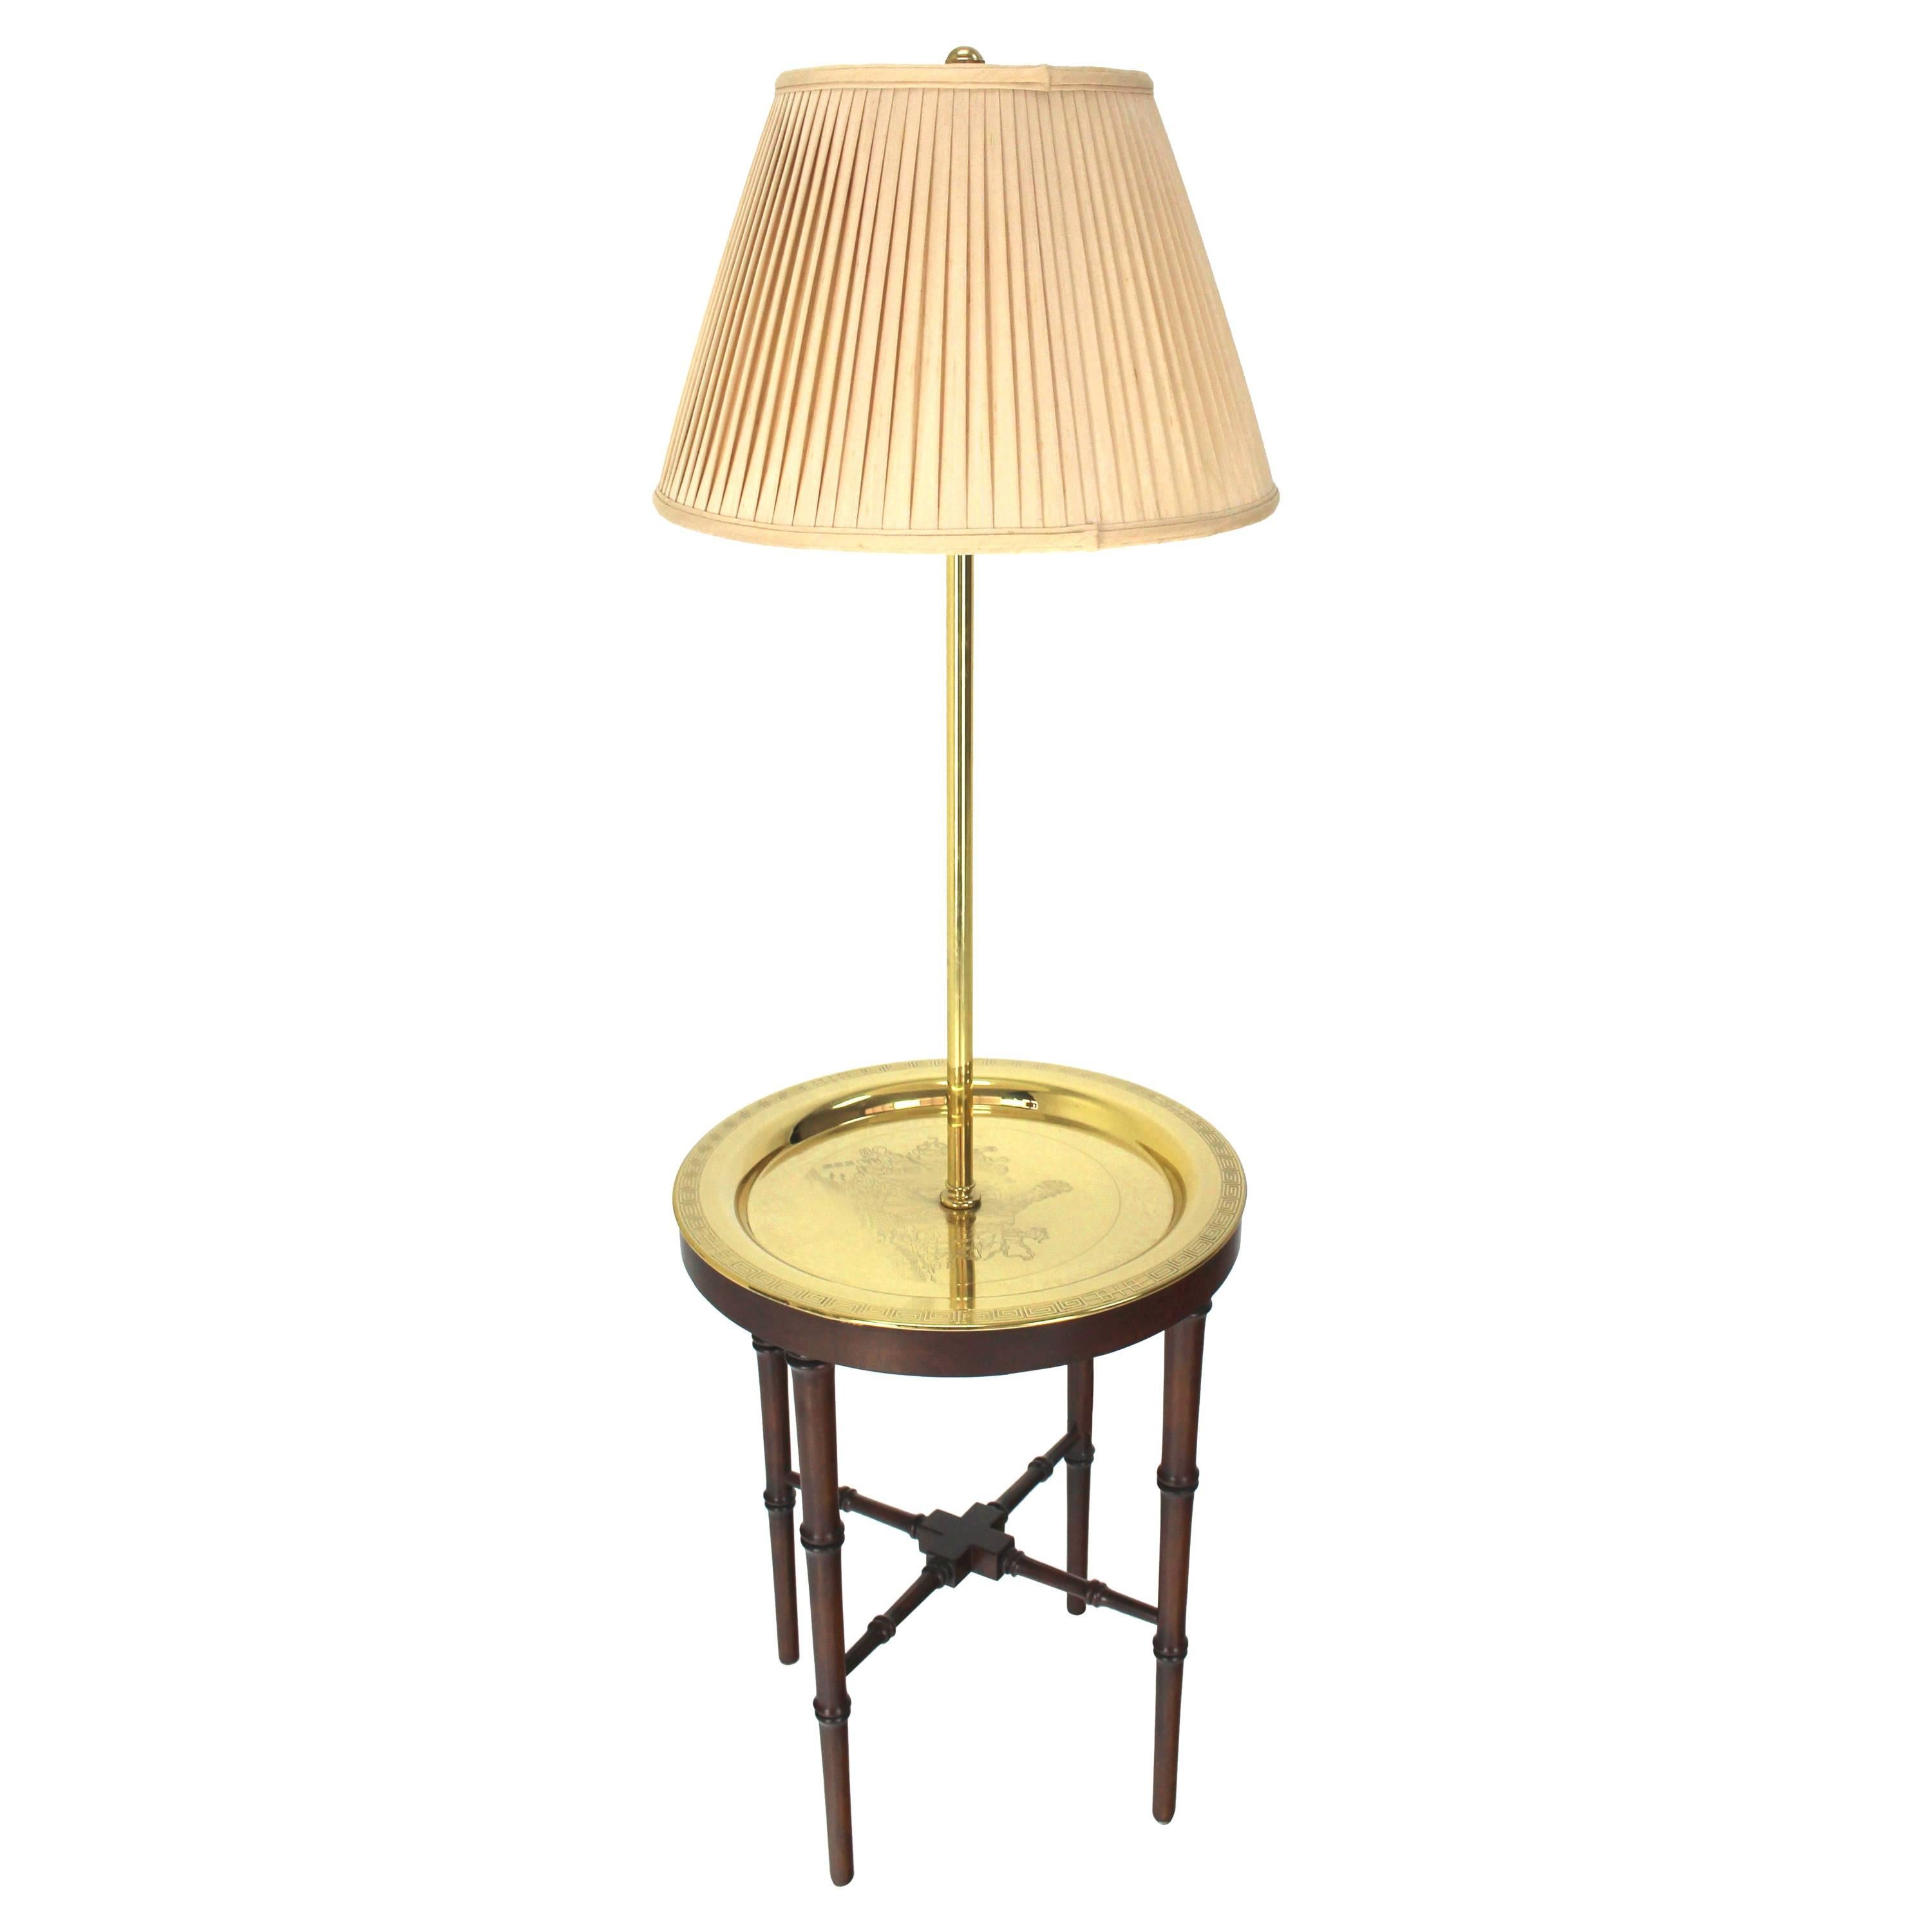 Four Legs Faux Bamboo Brass Tray Table Floor Lamp